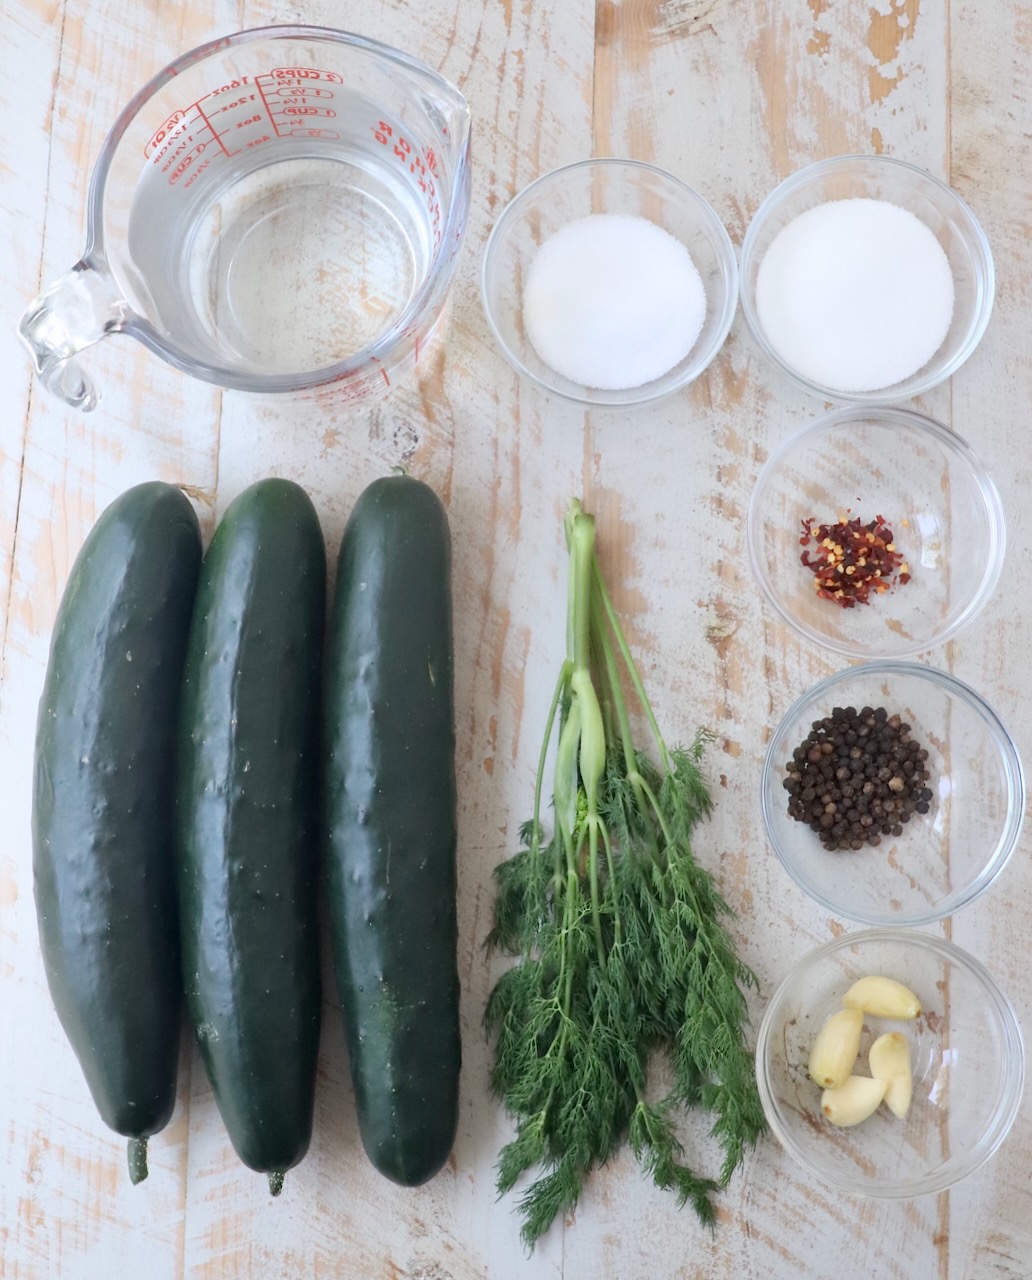 ingredients for homemade pickles on white wood board